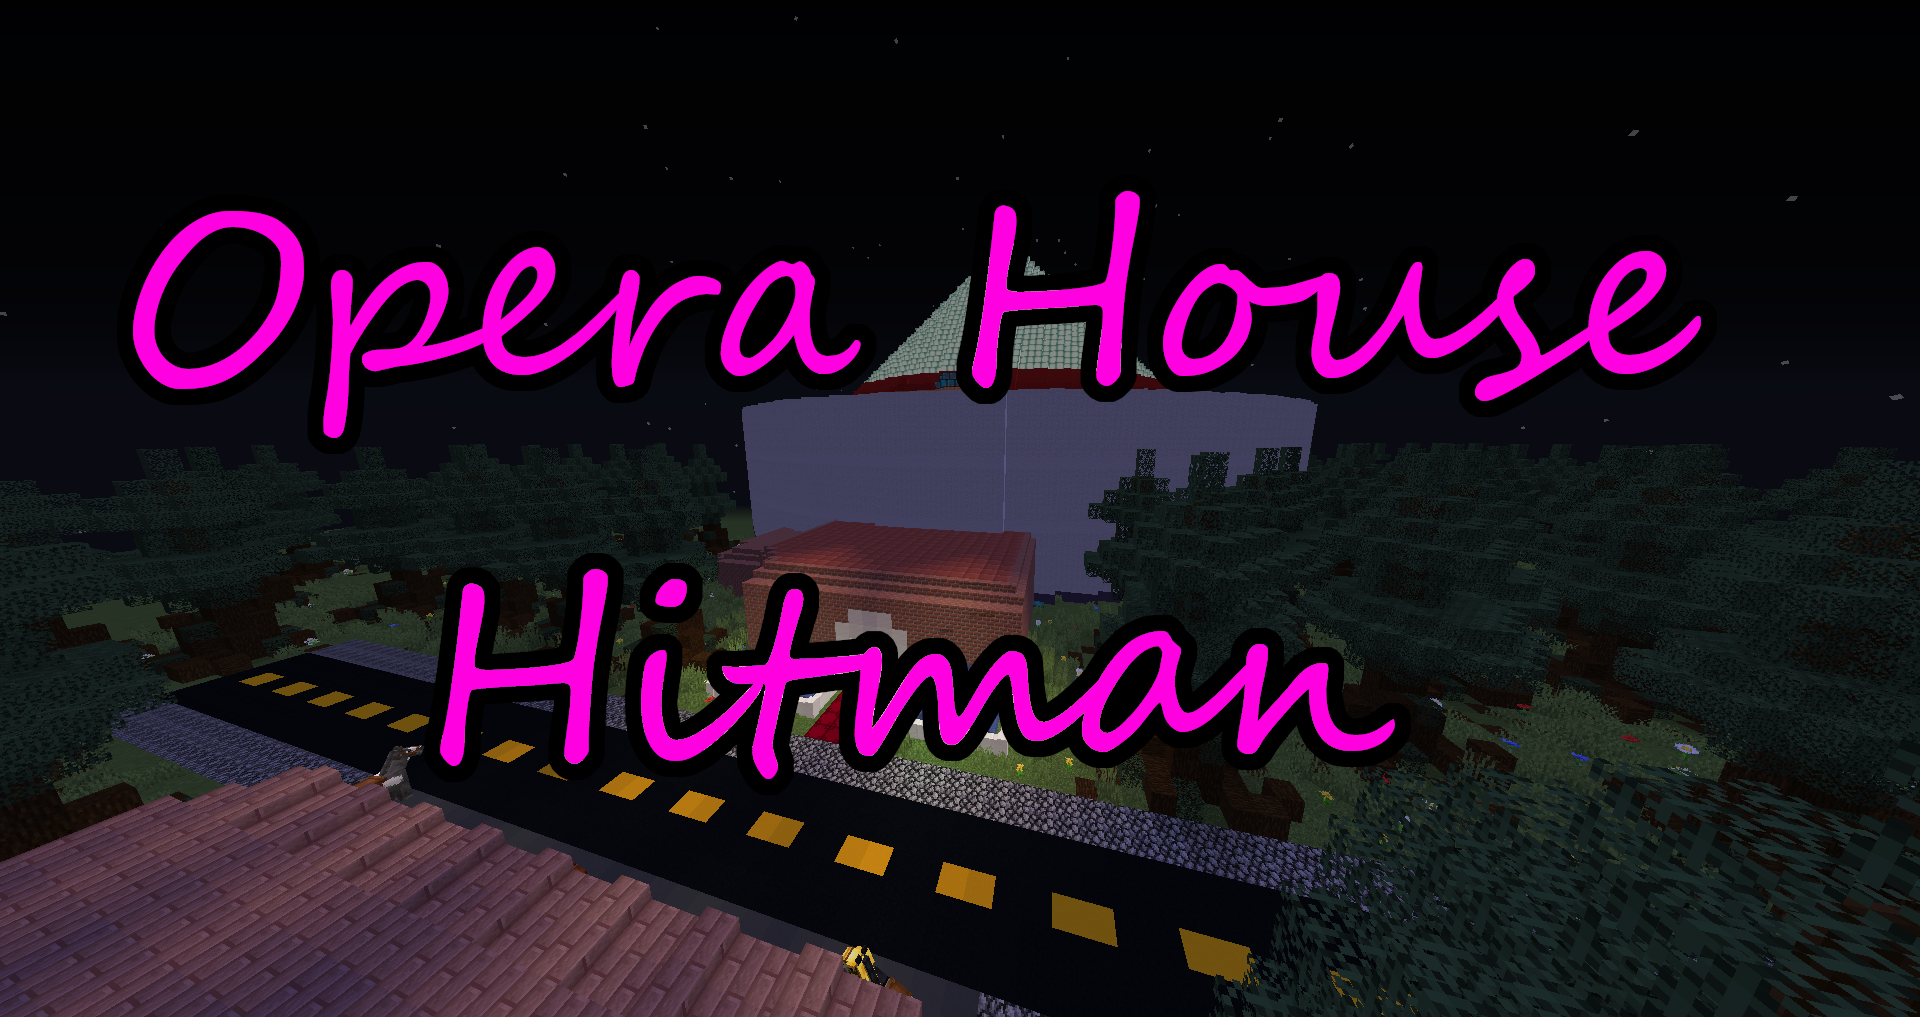 Download Opera House Hitman for Minecraft 1.16.3